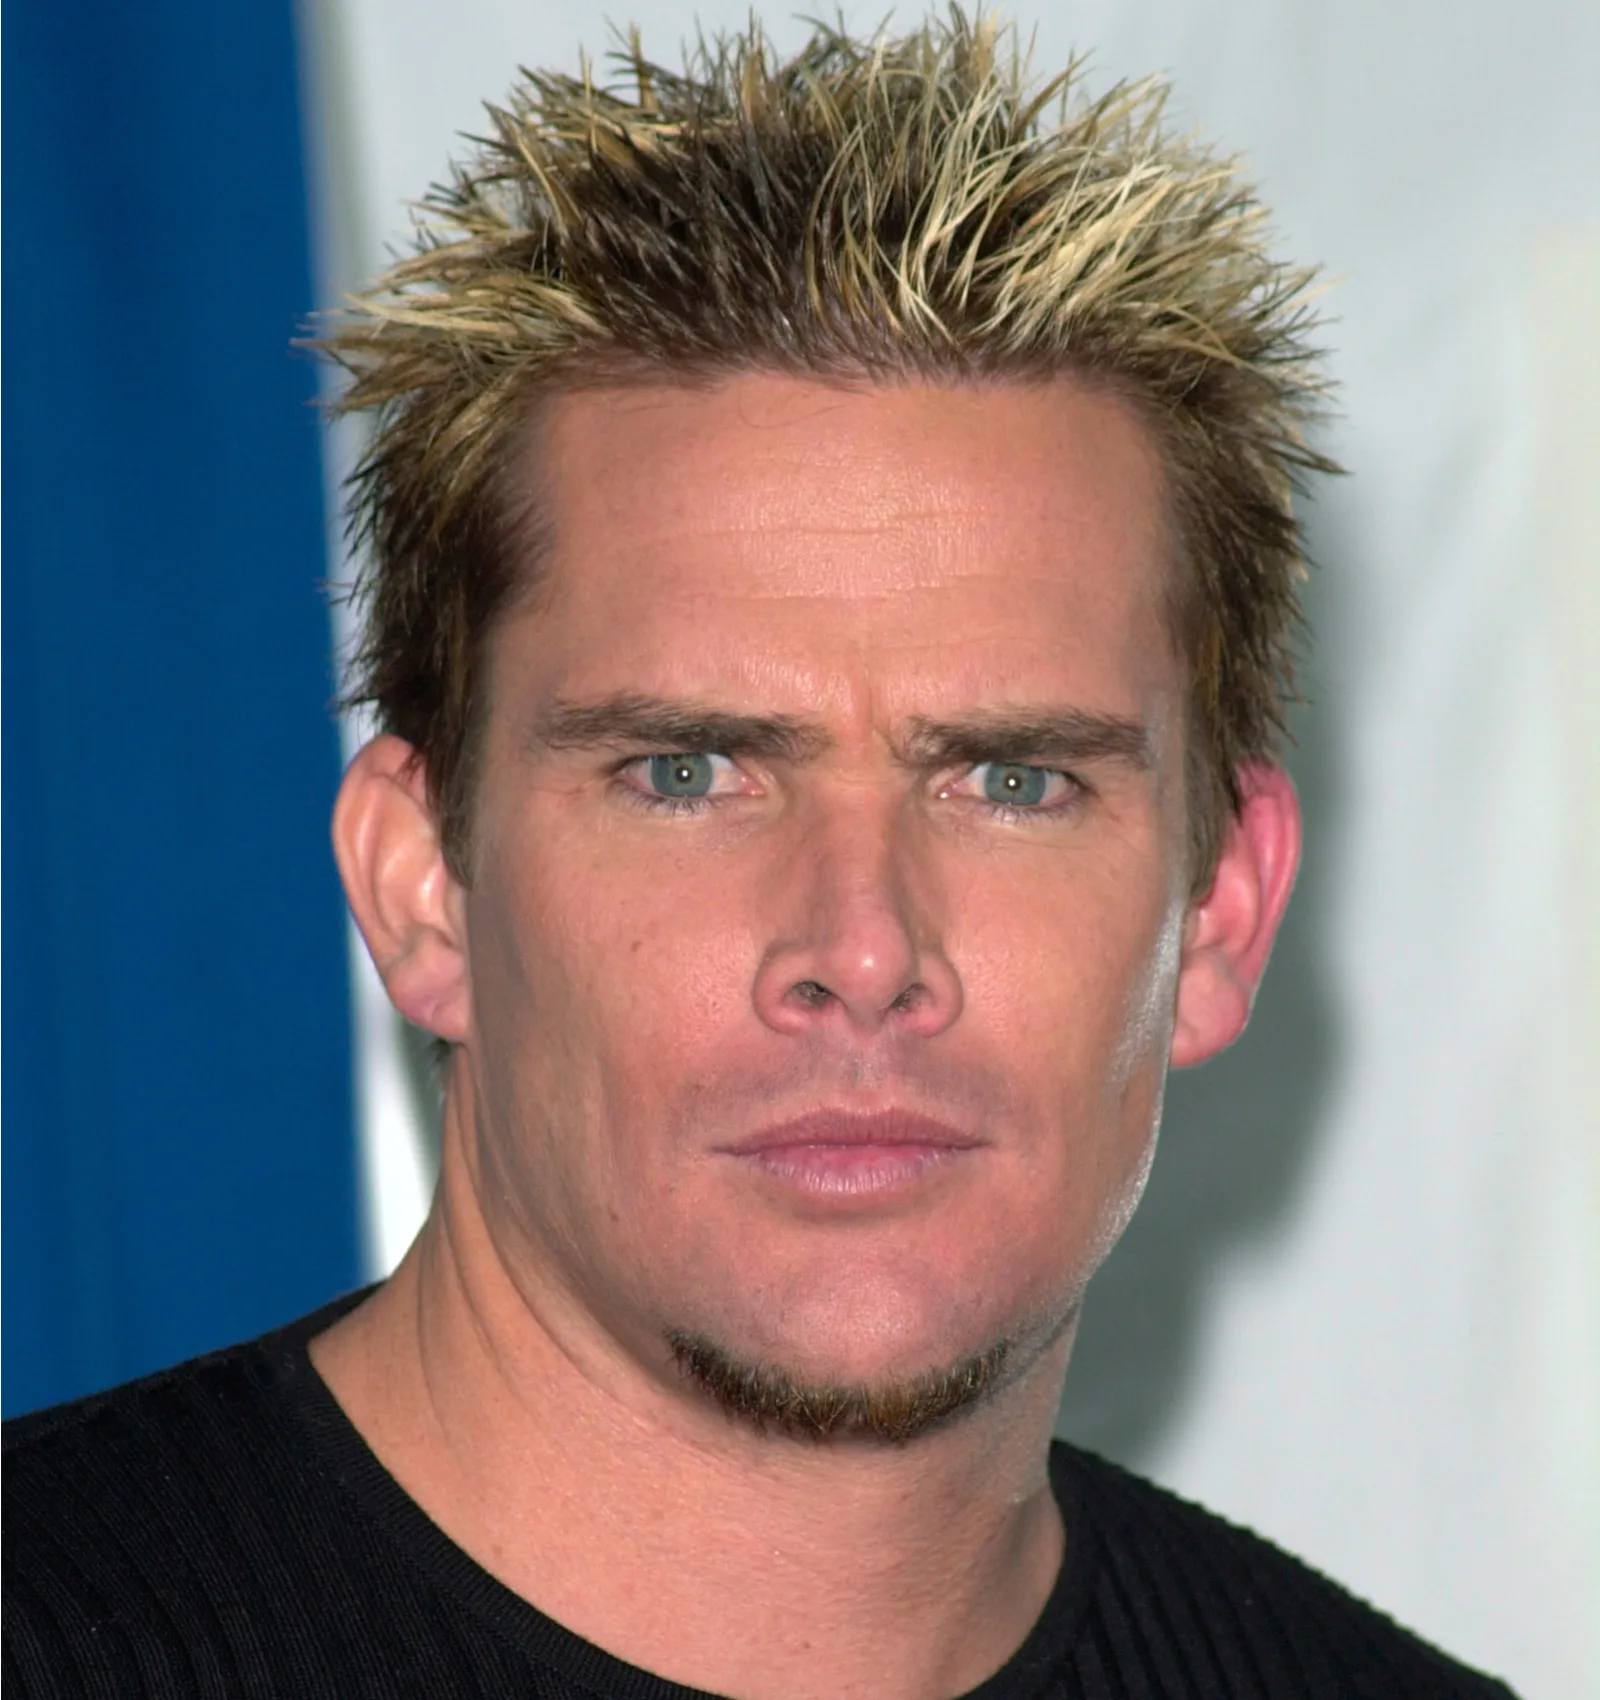 Photo of singer Mark Mcgrath at the Radio Music Awards rocking frosted tips hair